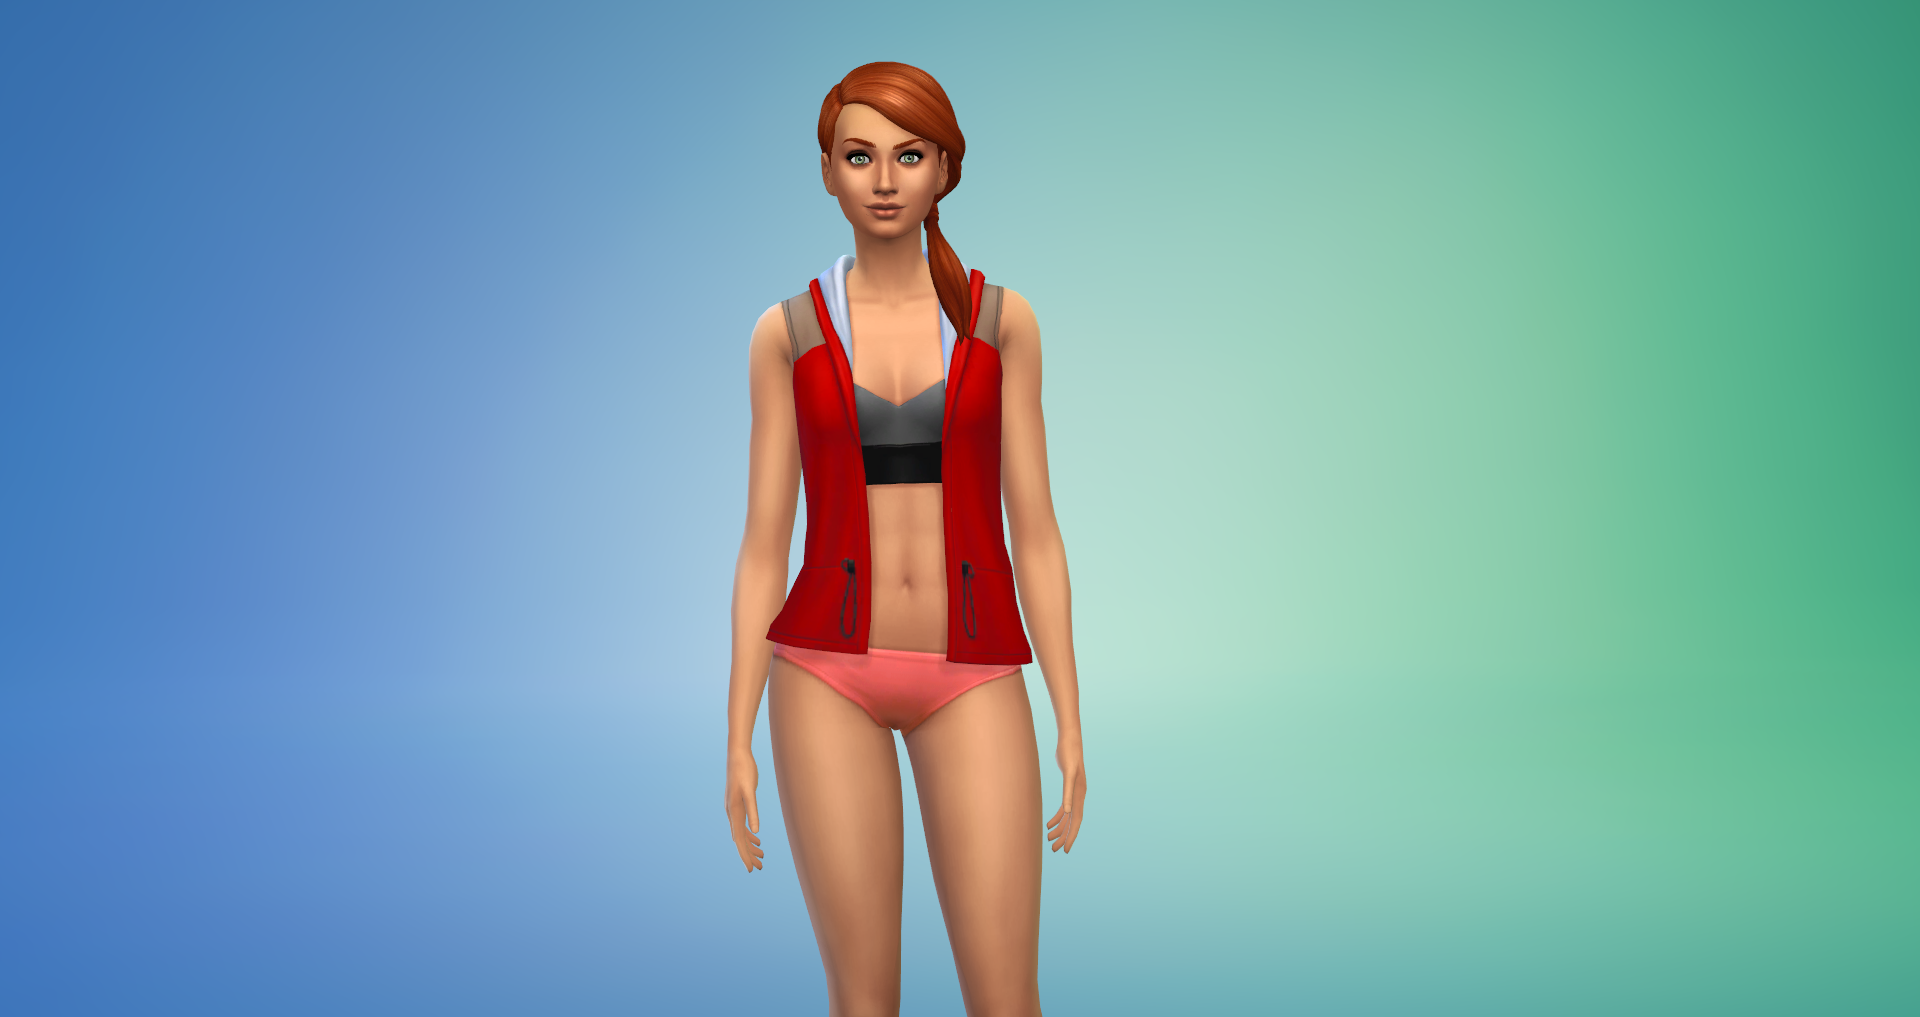 The Sims Fitness Stuff Pack Guide | SimsVIP